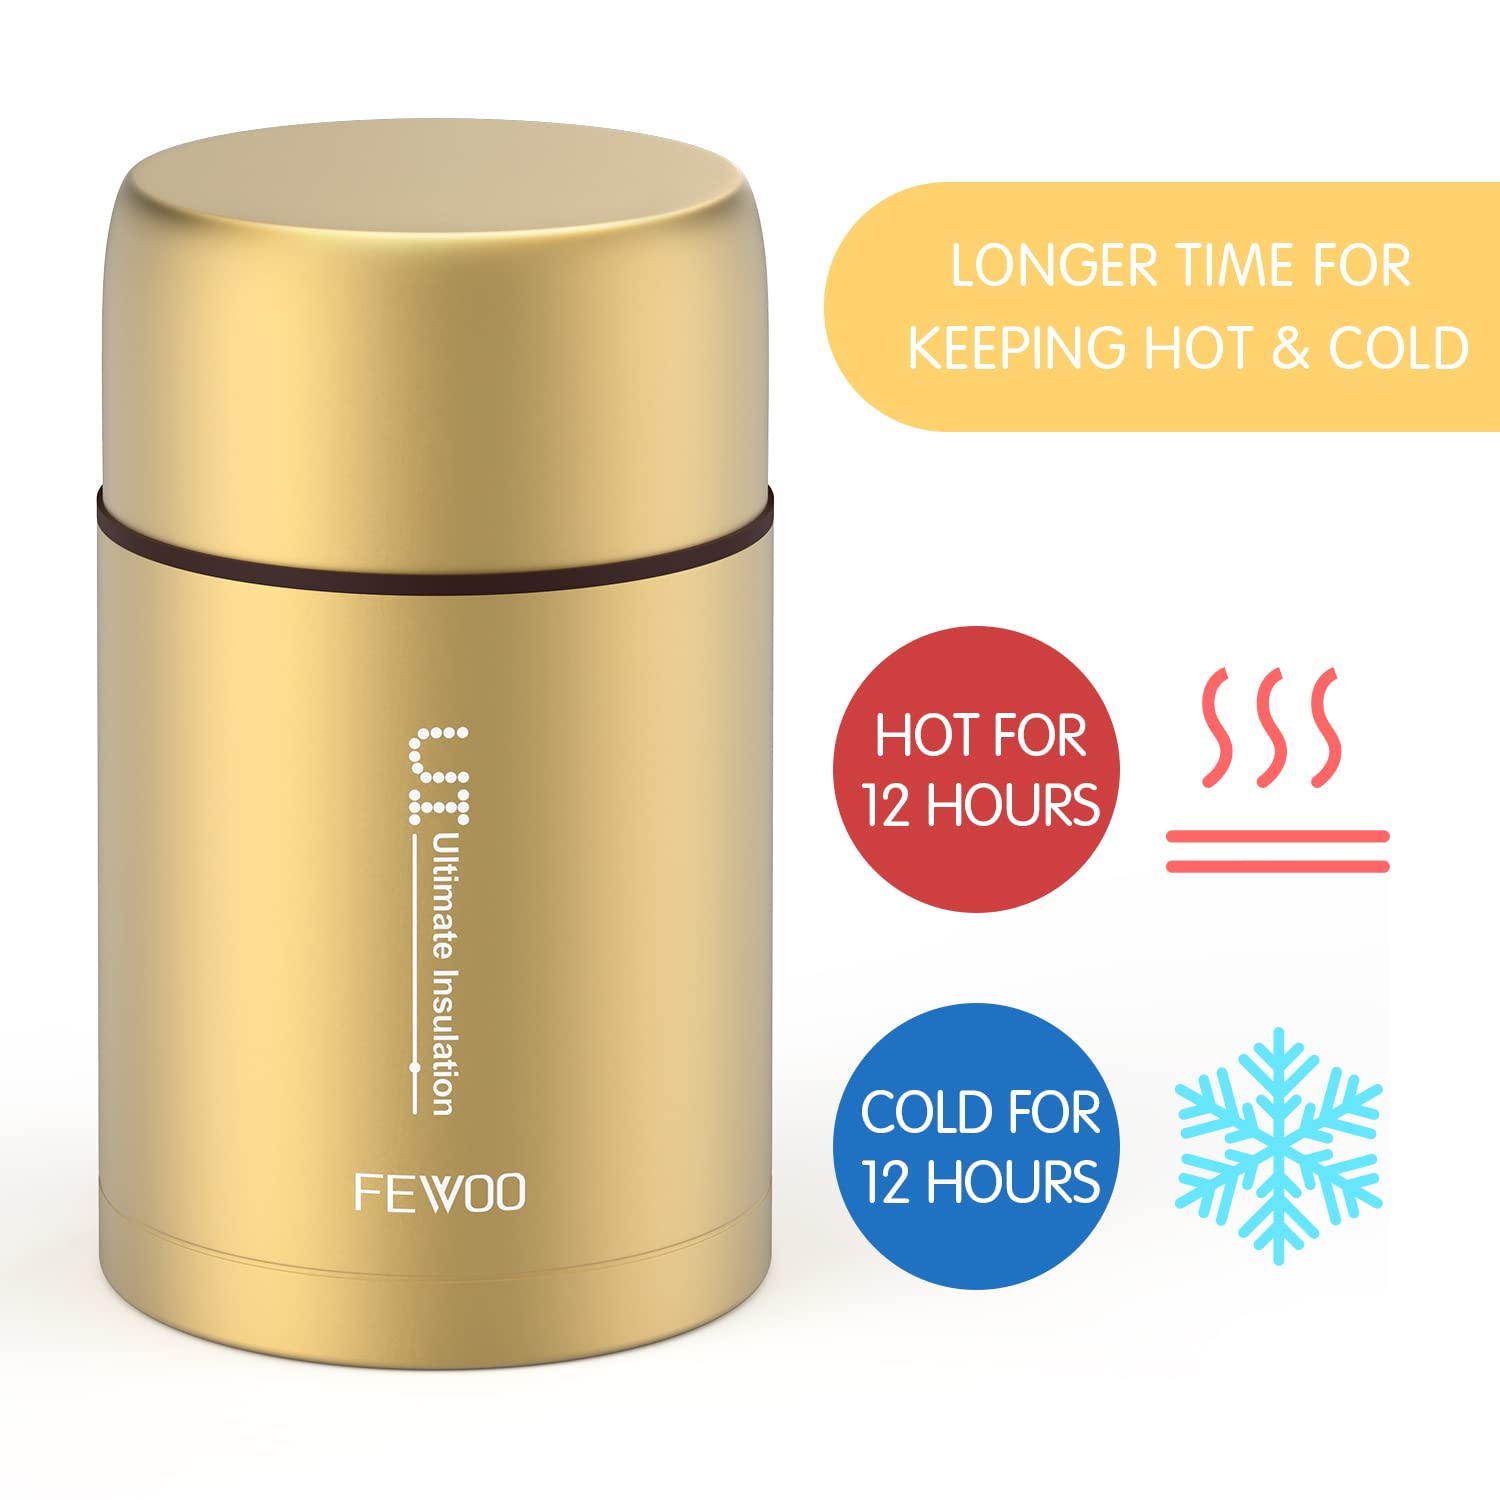 FEWOO Food Jar - 27oz Vacuum Insulated Stainless Steel Lunch Thermos, Leak Proof Soup Containers with bag for Hot or Cold Food (Champaign Golden)